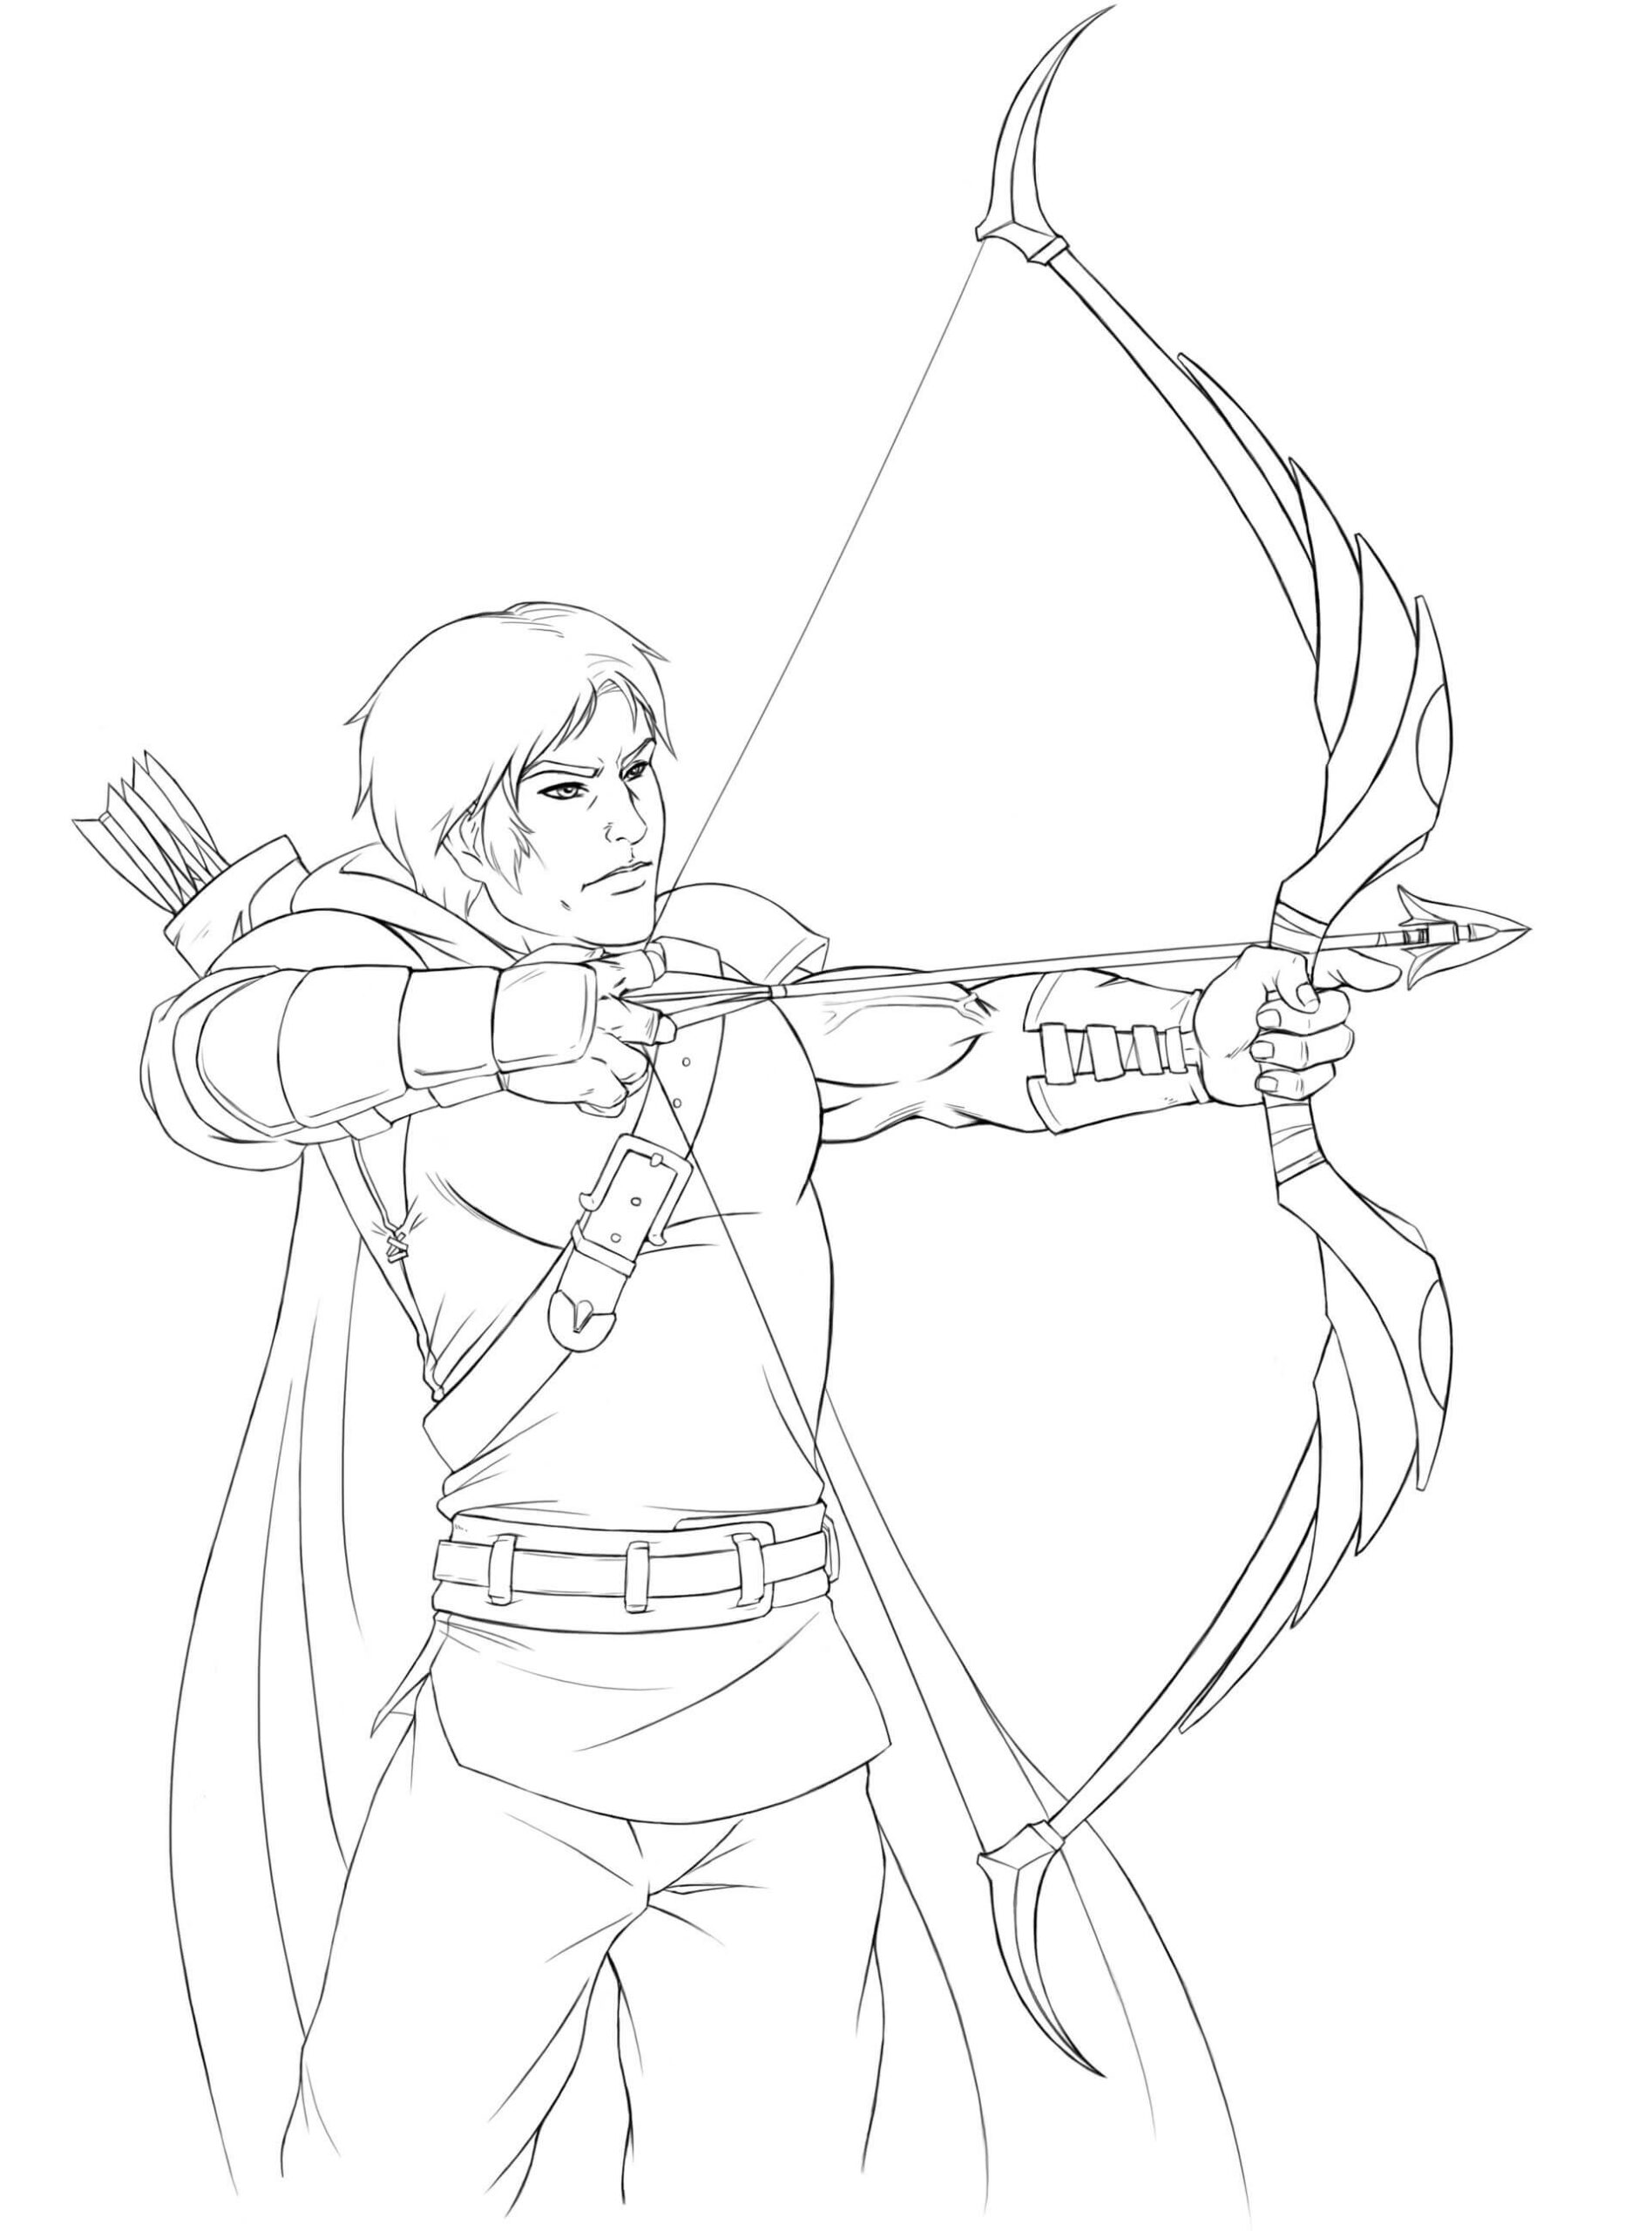 Archer Incroyable coloring page